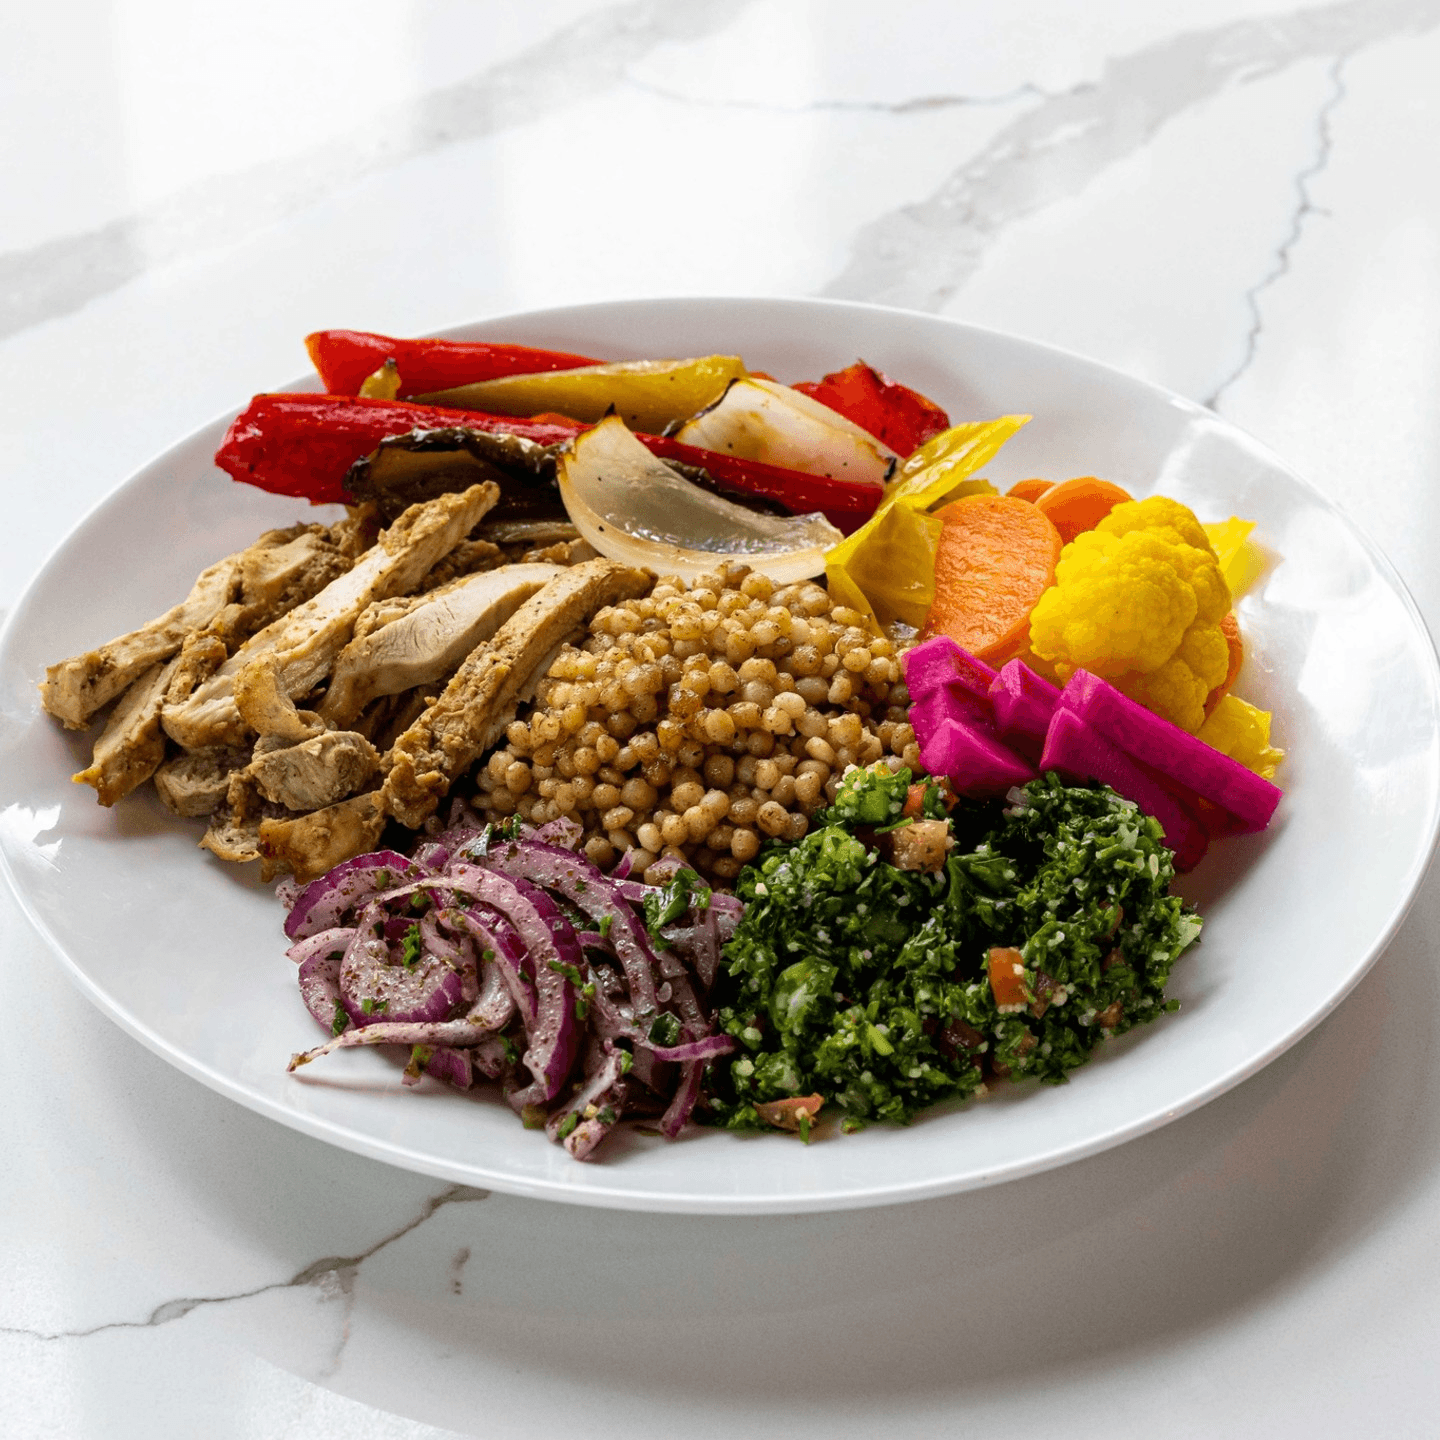 Indulge in our Mediterranean Bowl Bliss!